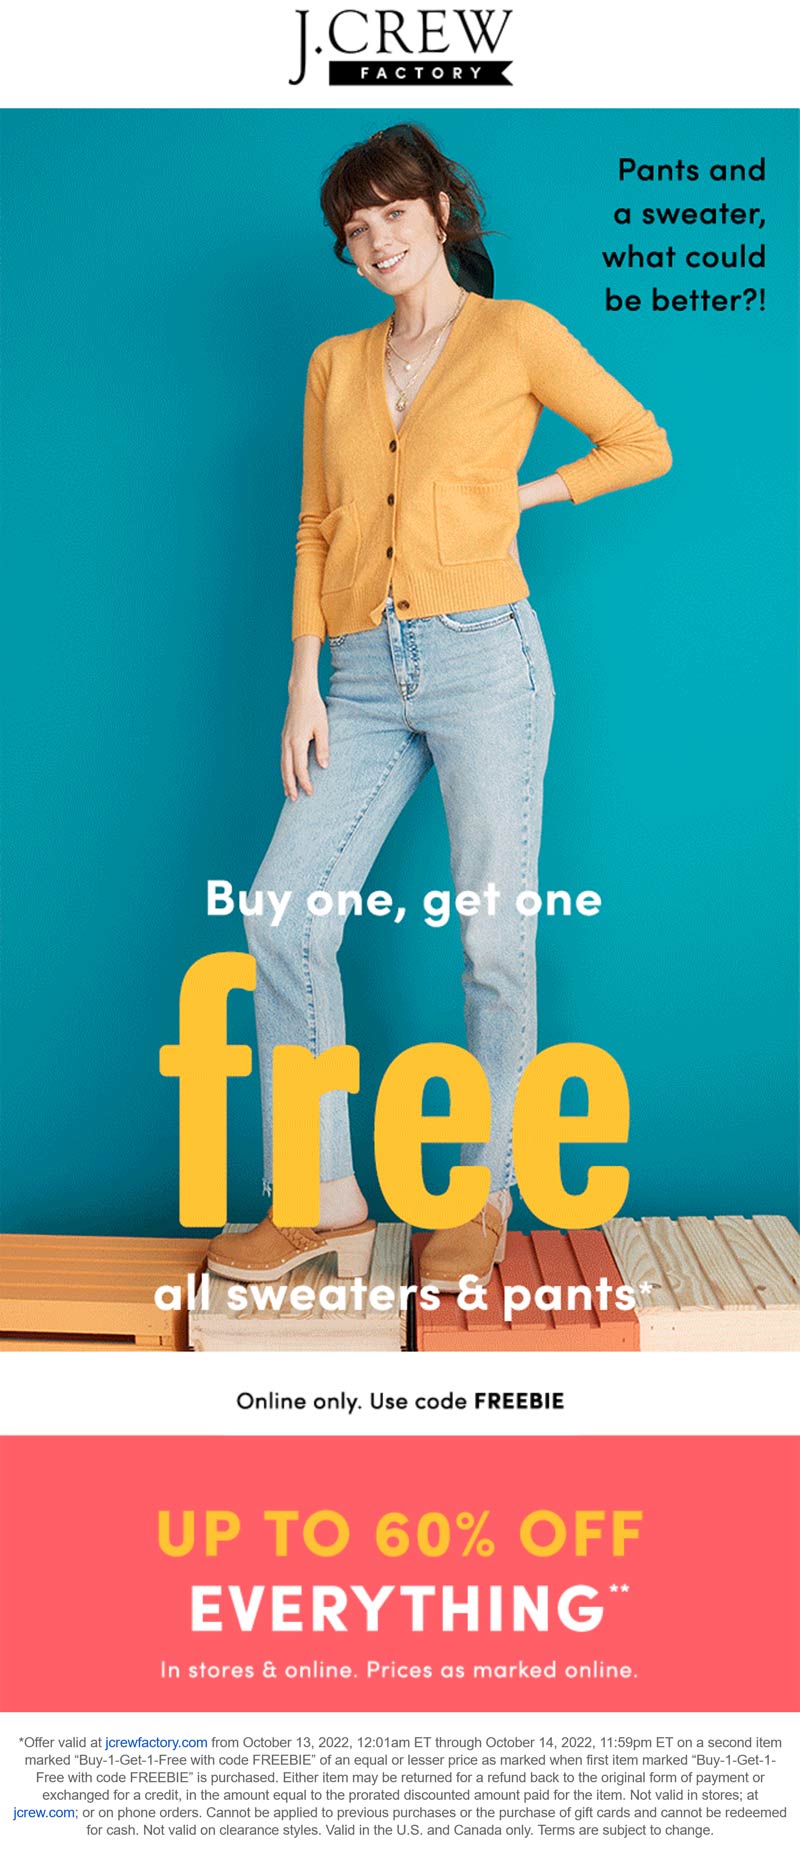 J.Crew Factory stores Coupon  Second sweater or pants free online at J.Crew Factory via promo code FREEBIE #jcrewfactory 